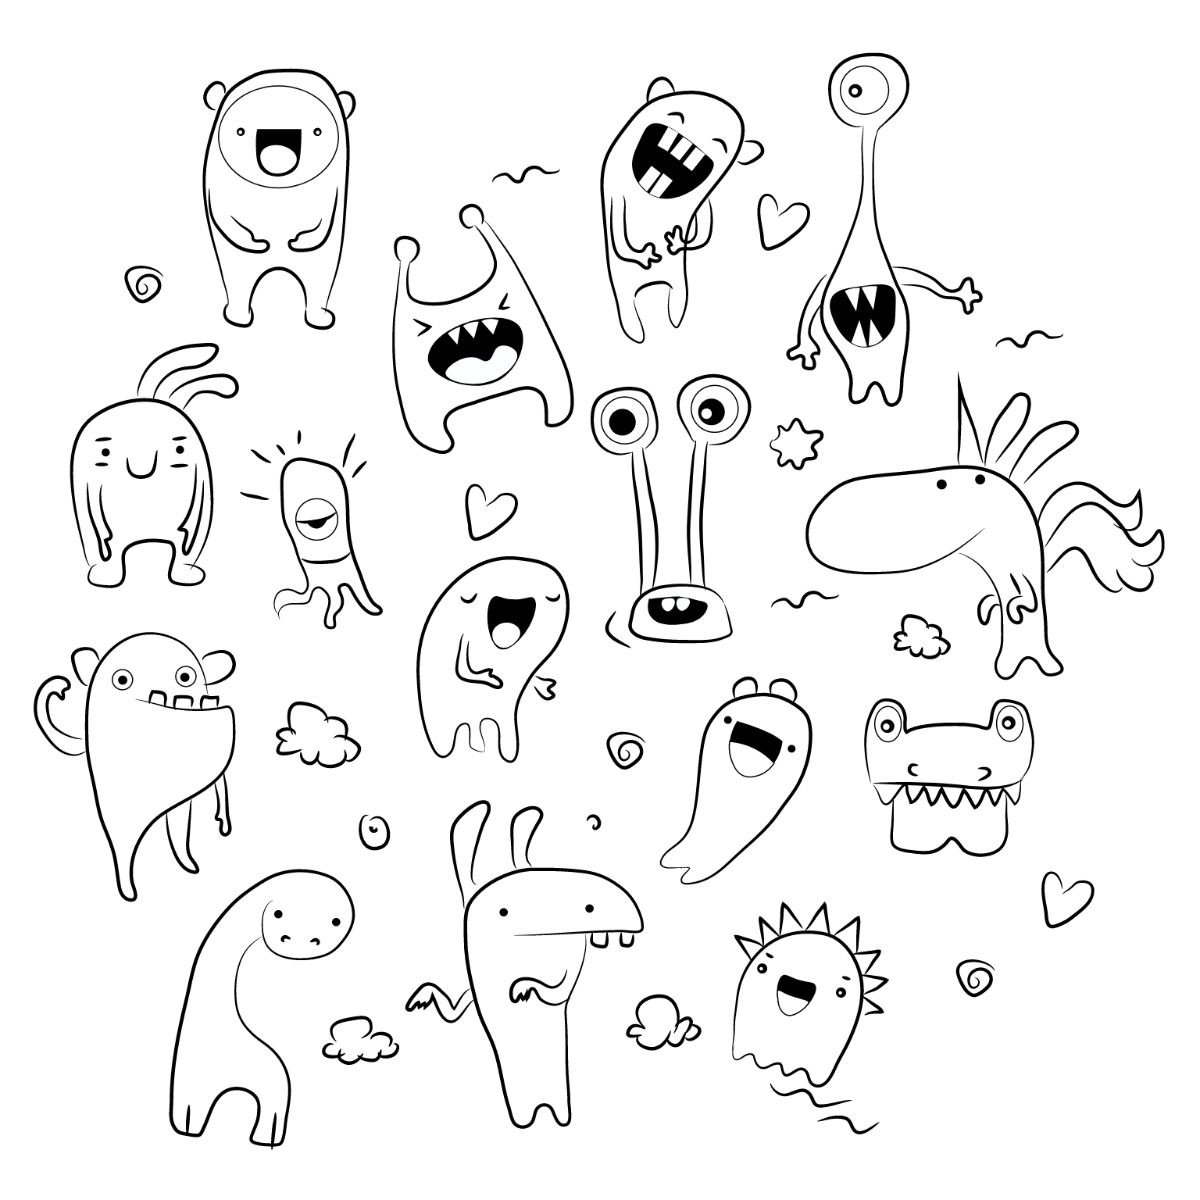 Free Doodle Character Vector Template